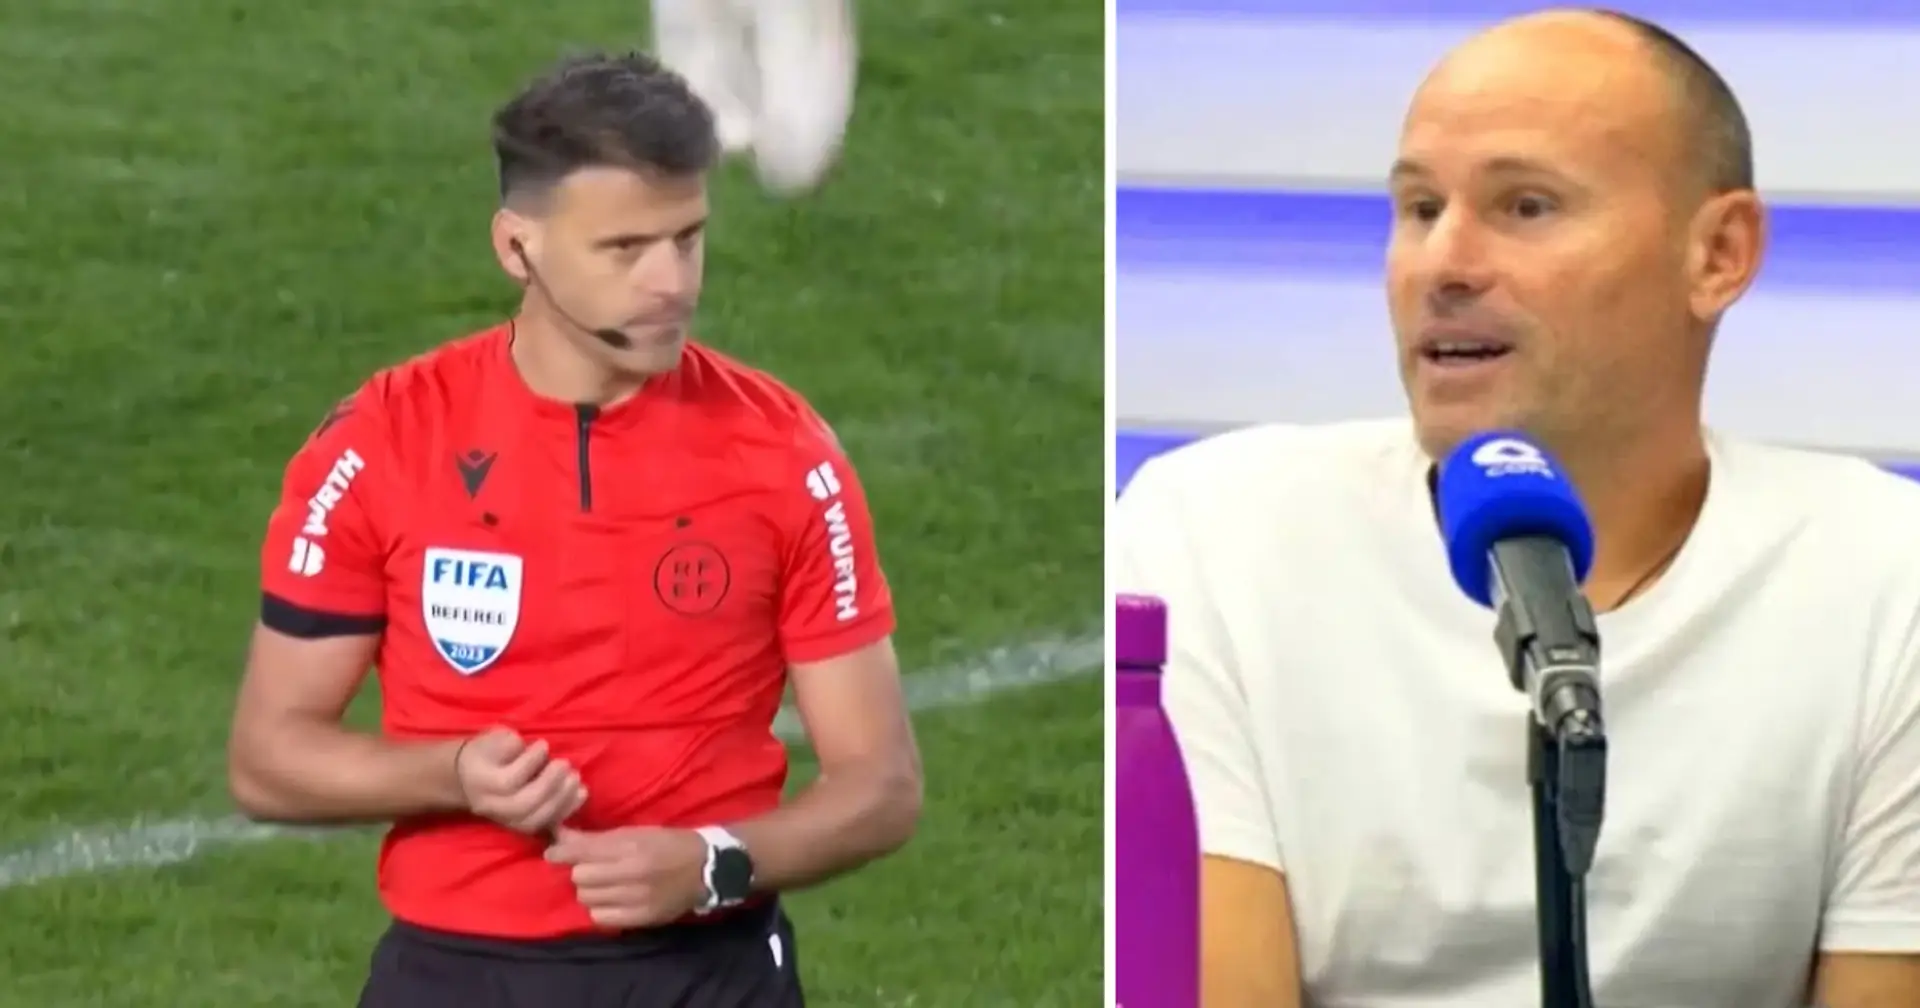 'A systemic error': Former La Liga referee hits out at Gil Manzano over horrendous officiating